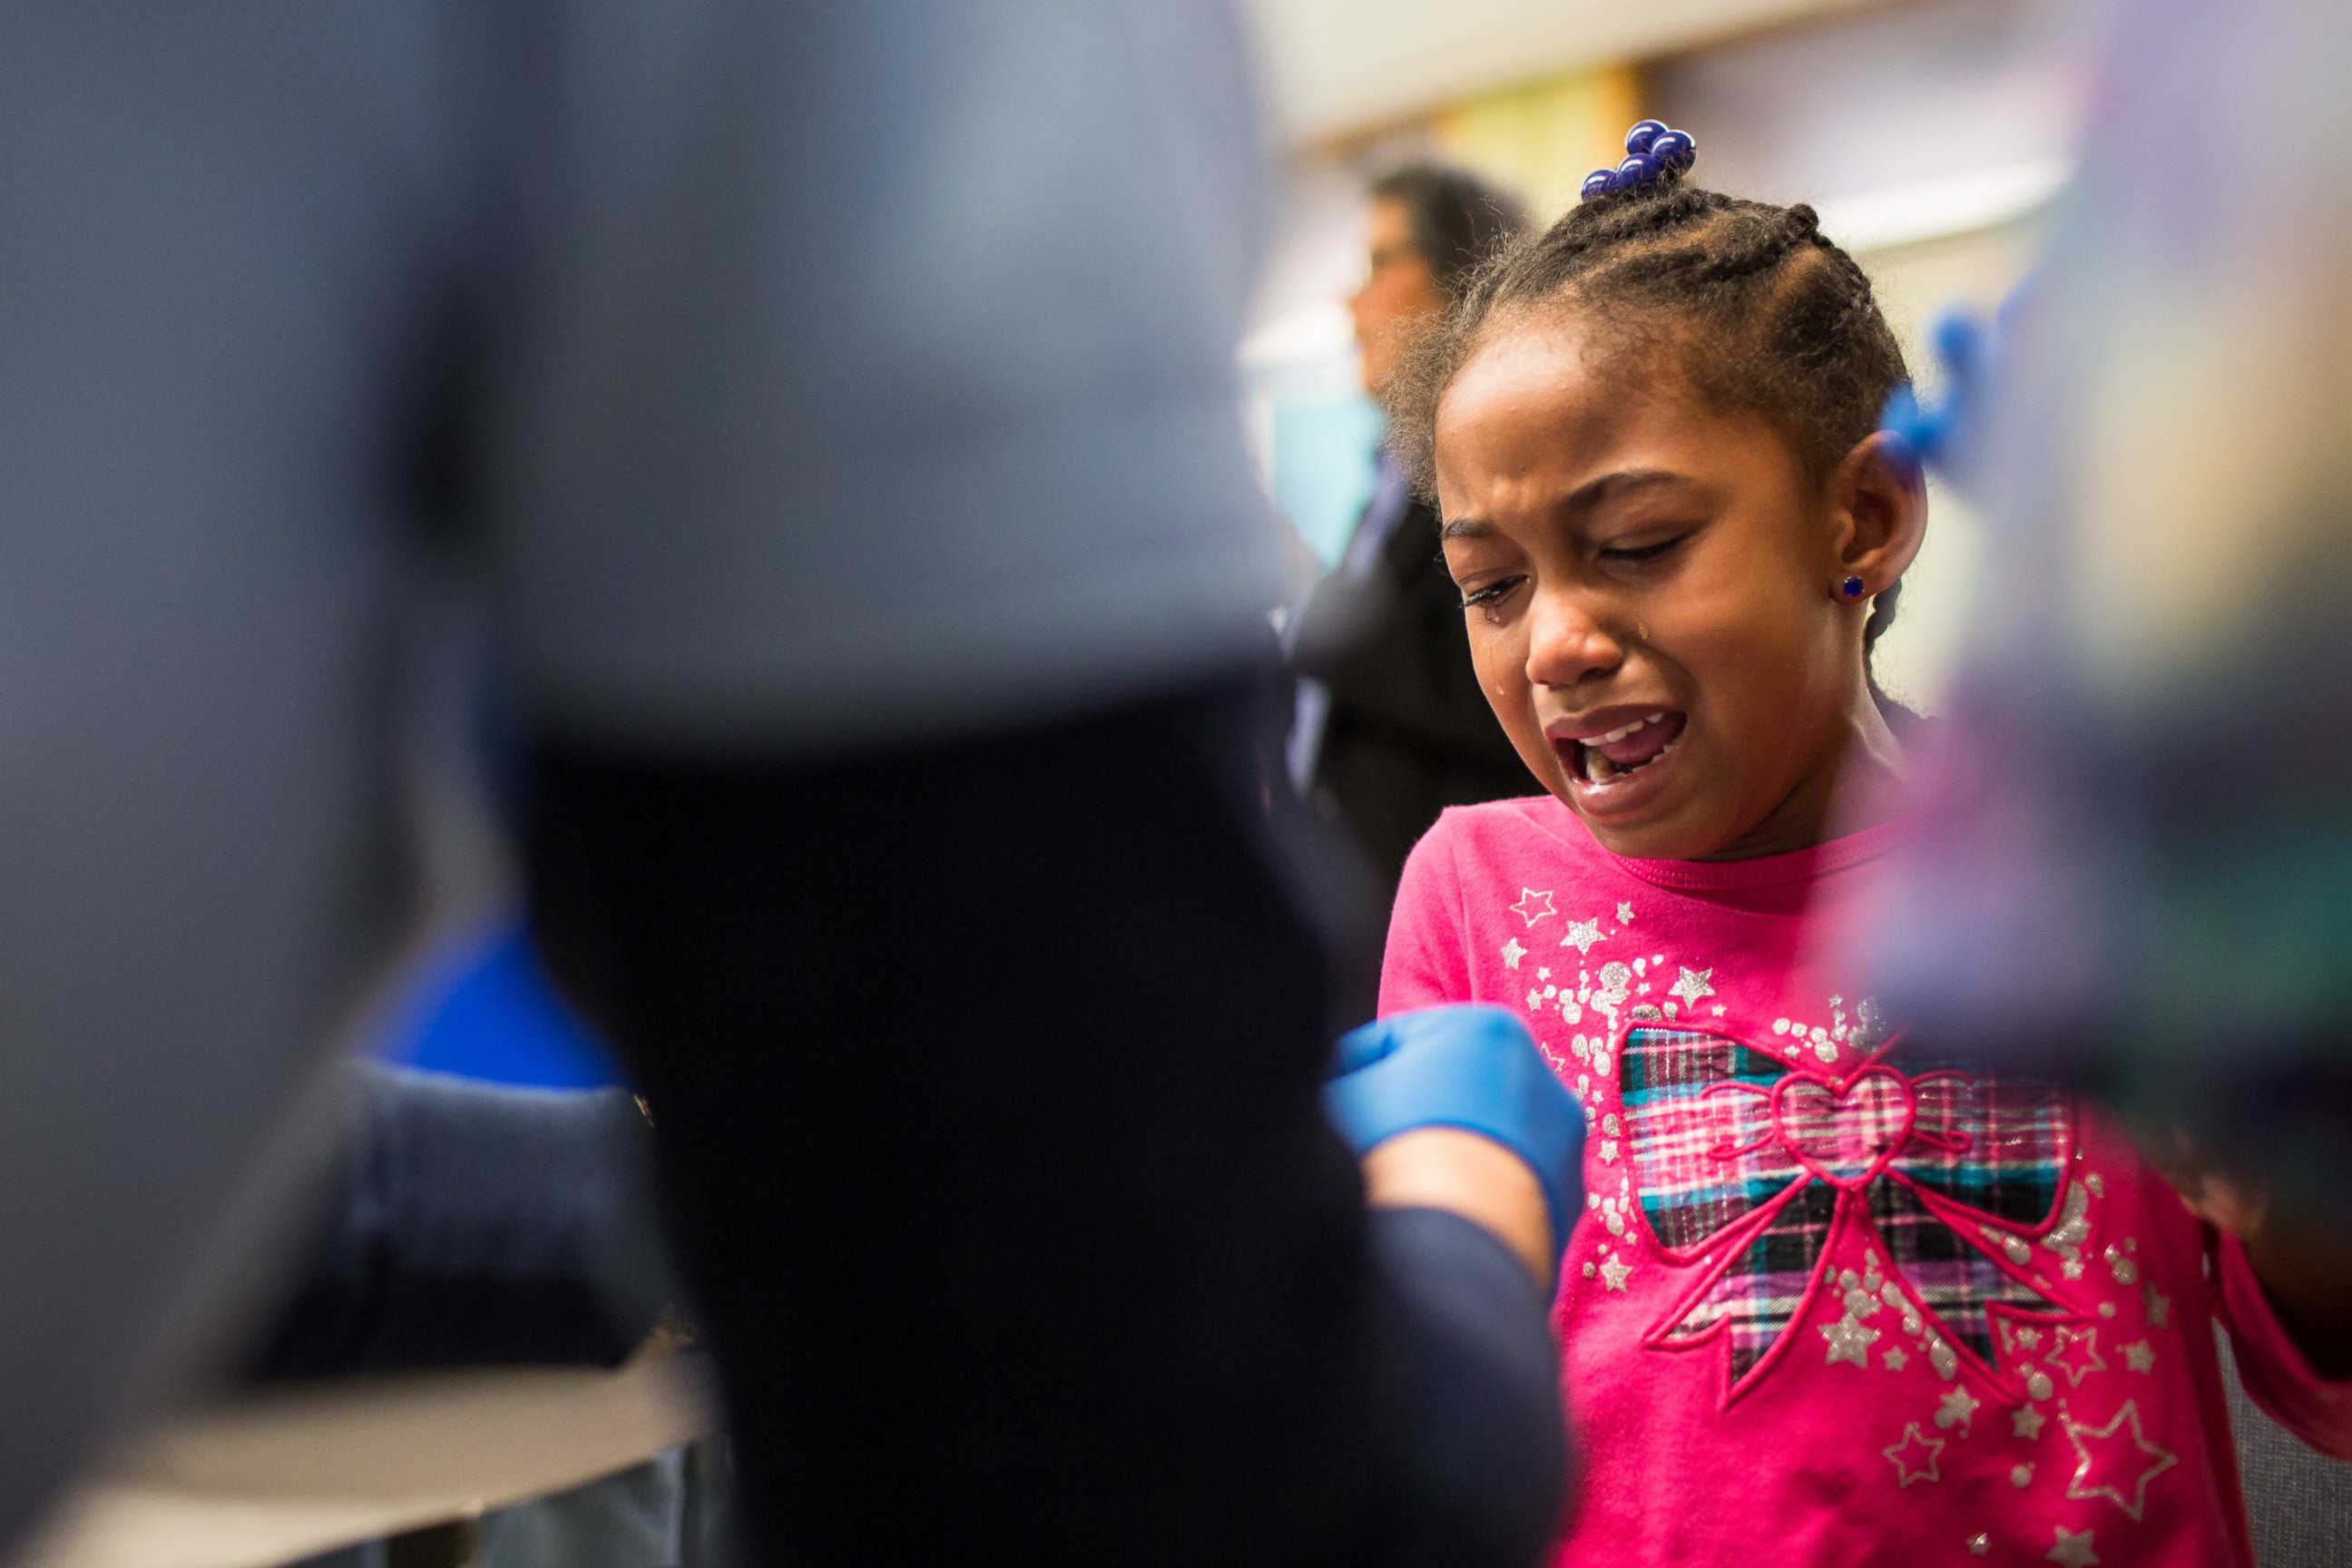 PHOTO: Tears stream down the face of Morgan Walker, age 5 of Flint, as she gets her finger pricked for a lead screening on Jan. 26, 2016 at Eisenhower Elementary School in Flint, Mich.  